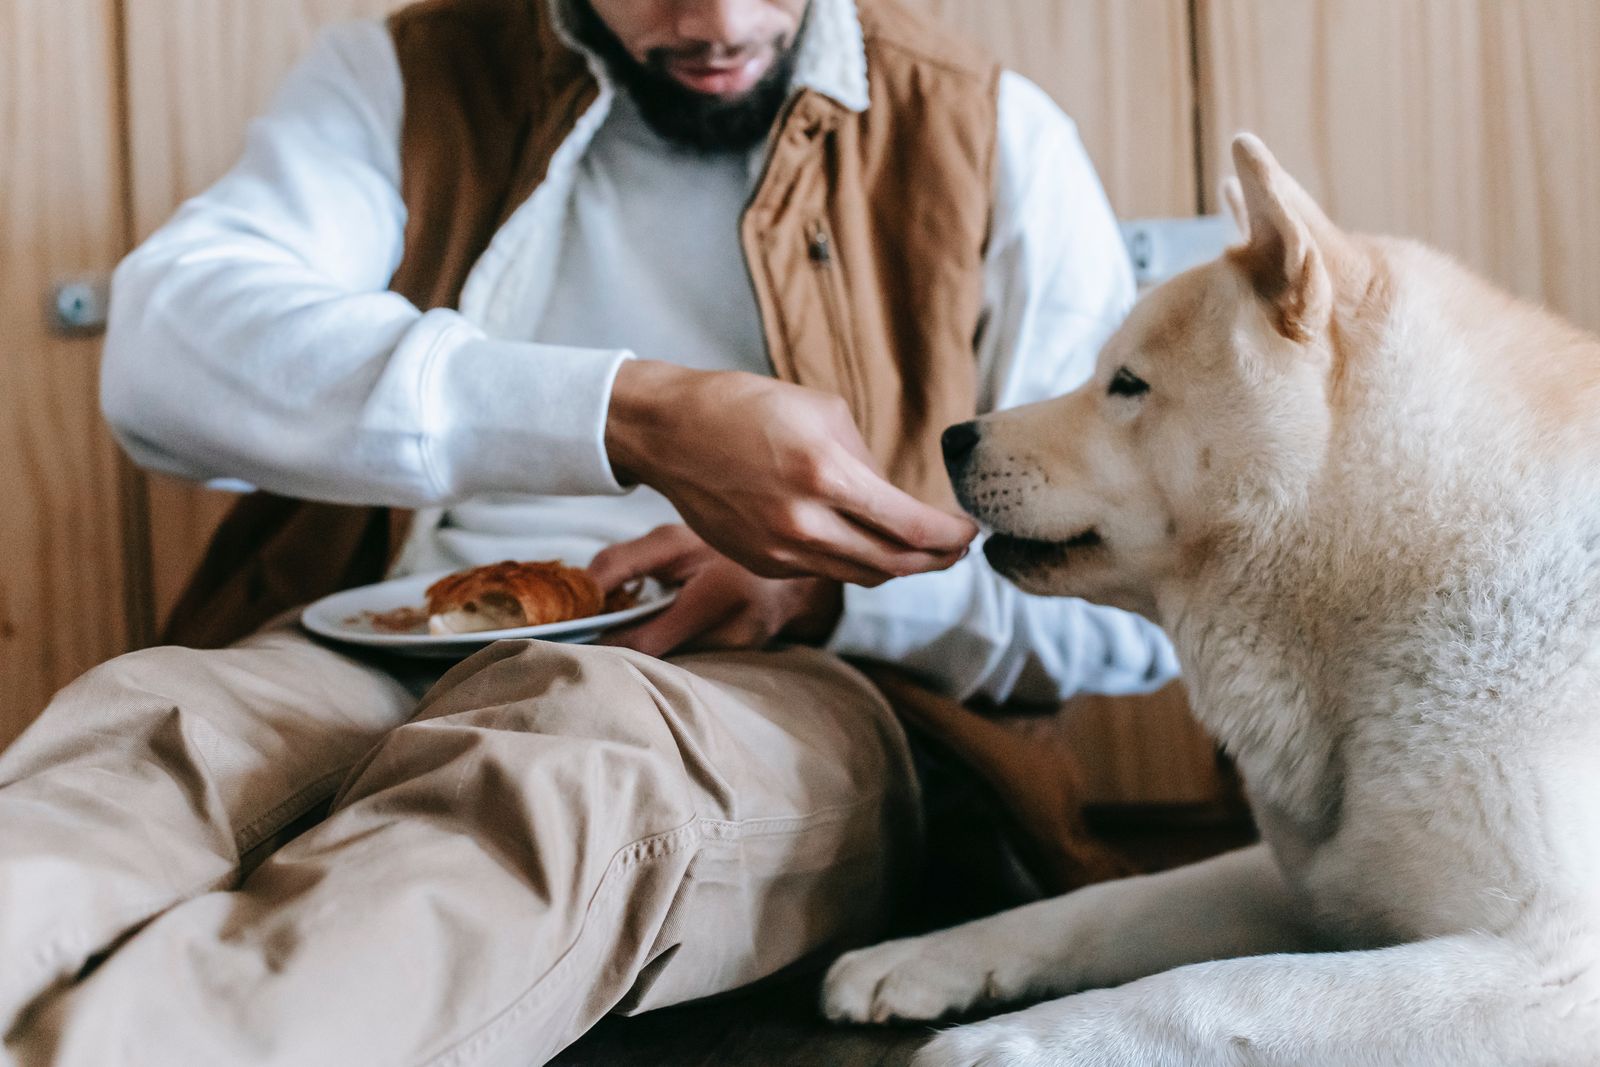 Eating Table Scraps and Raw Food May Help Protect Dogs Against Stomach  Issues | Smart News| Smithsonian Magazine